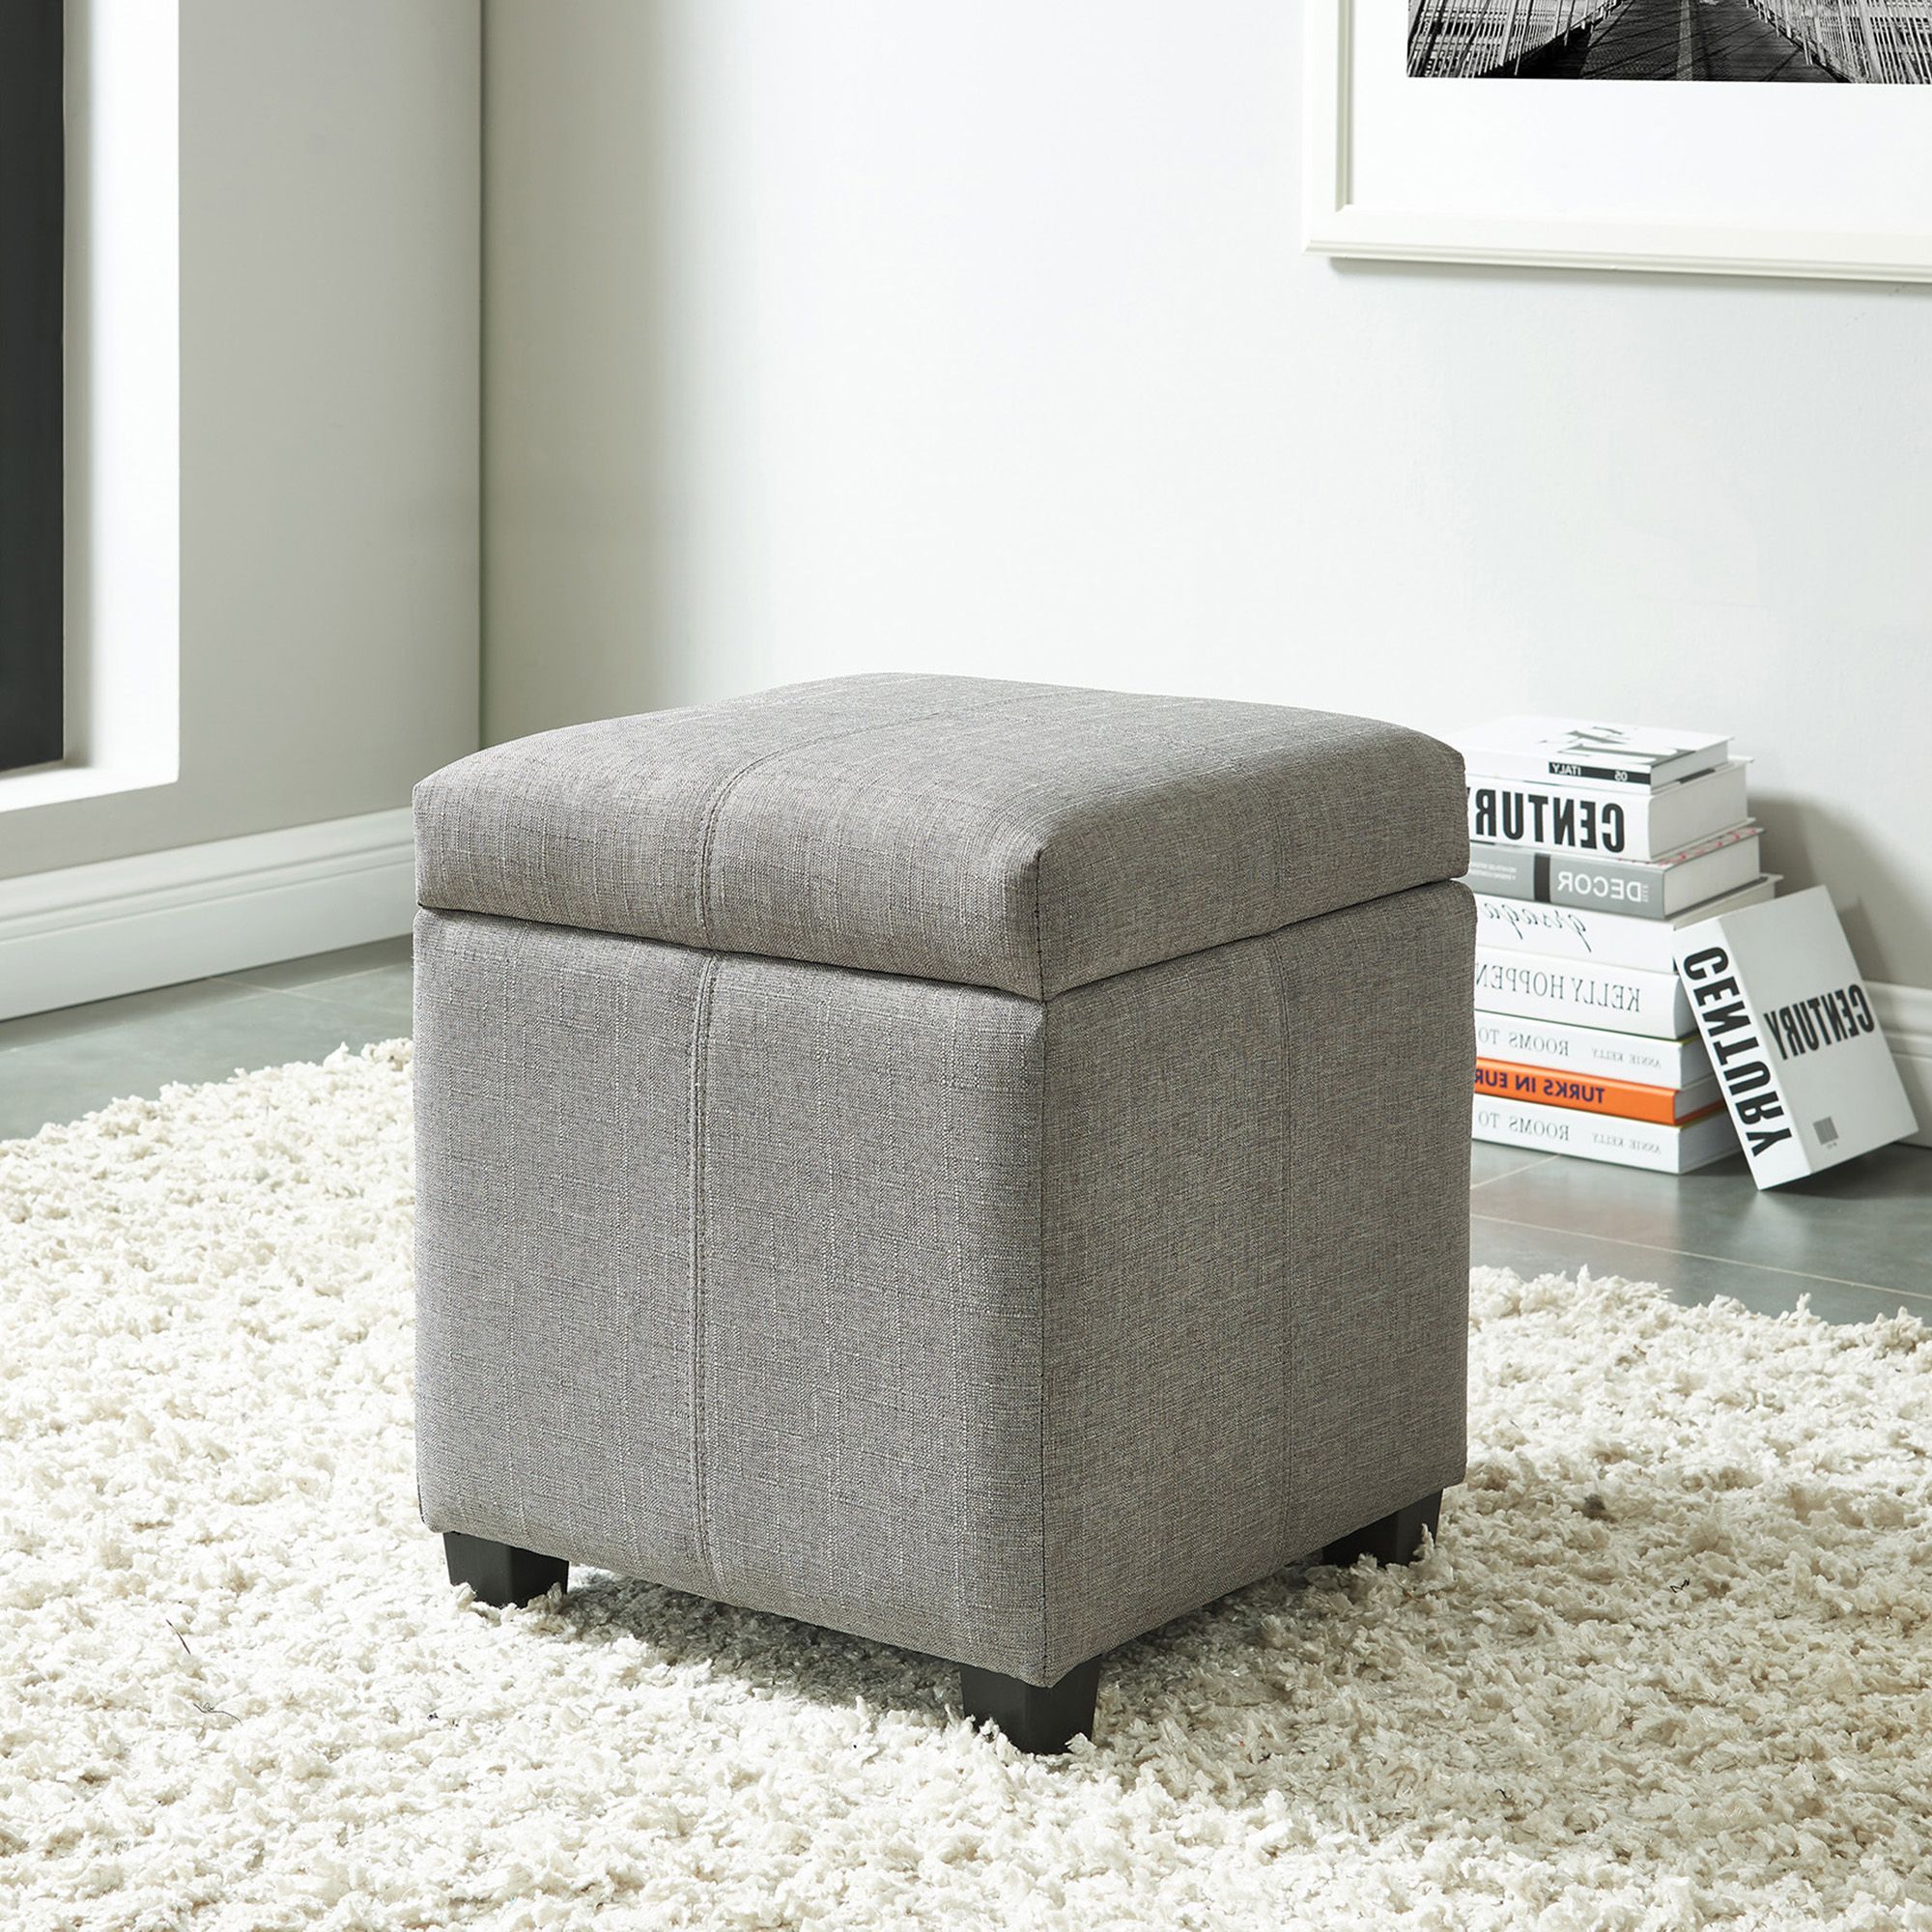 Trendy Hinged Lid Storage Ottoman, Grey – Walmart – Walmart In Charcoal And Light Gray Cotton Pouf Ottomans (View 2 of 10)